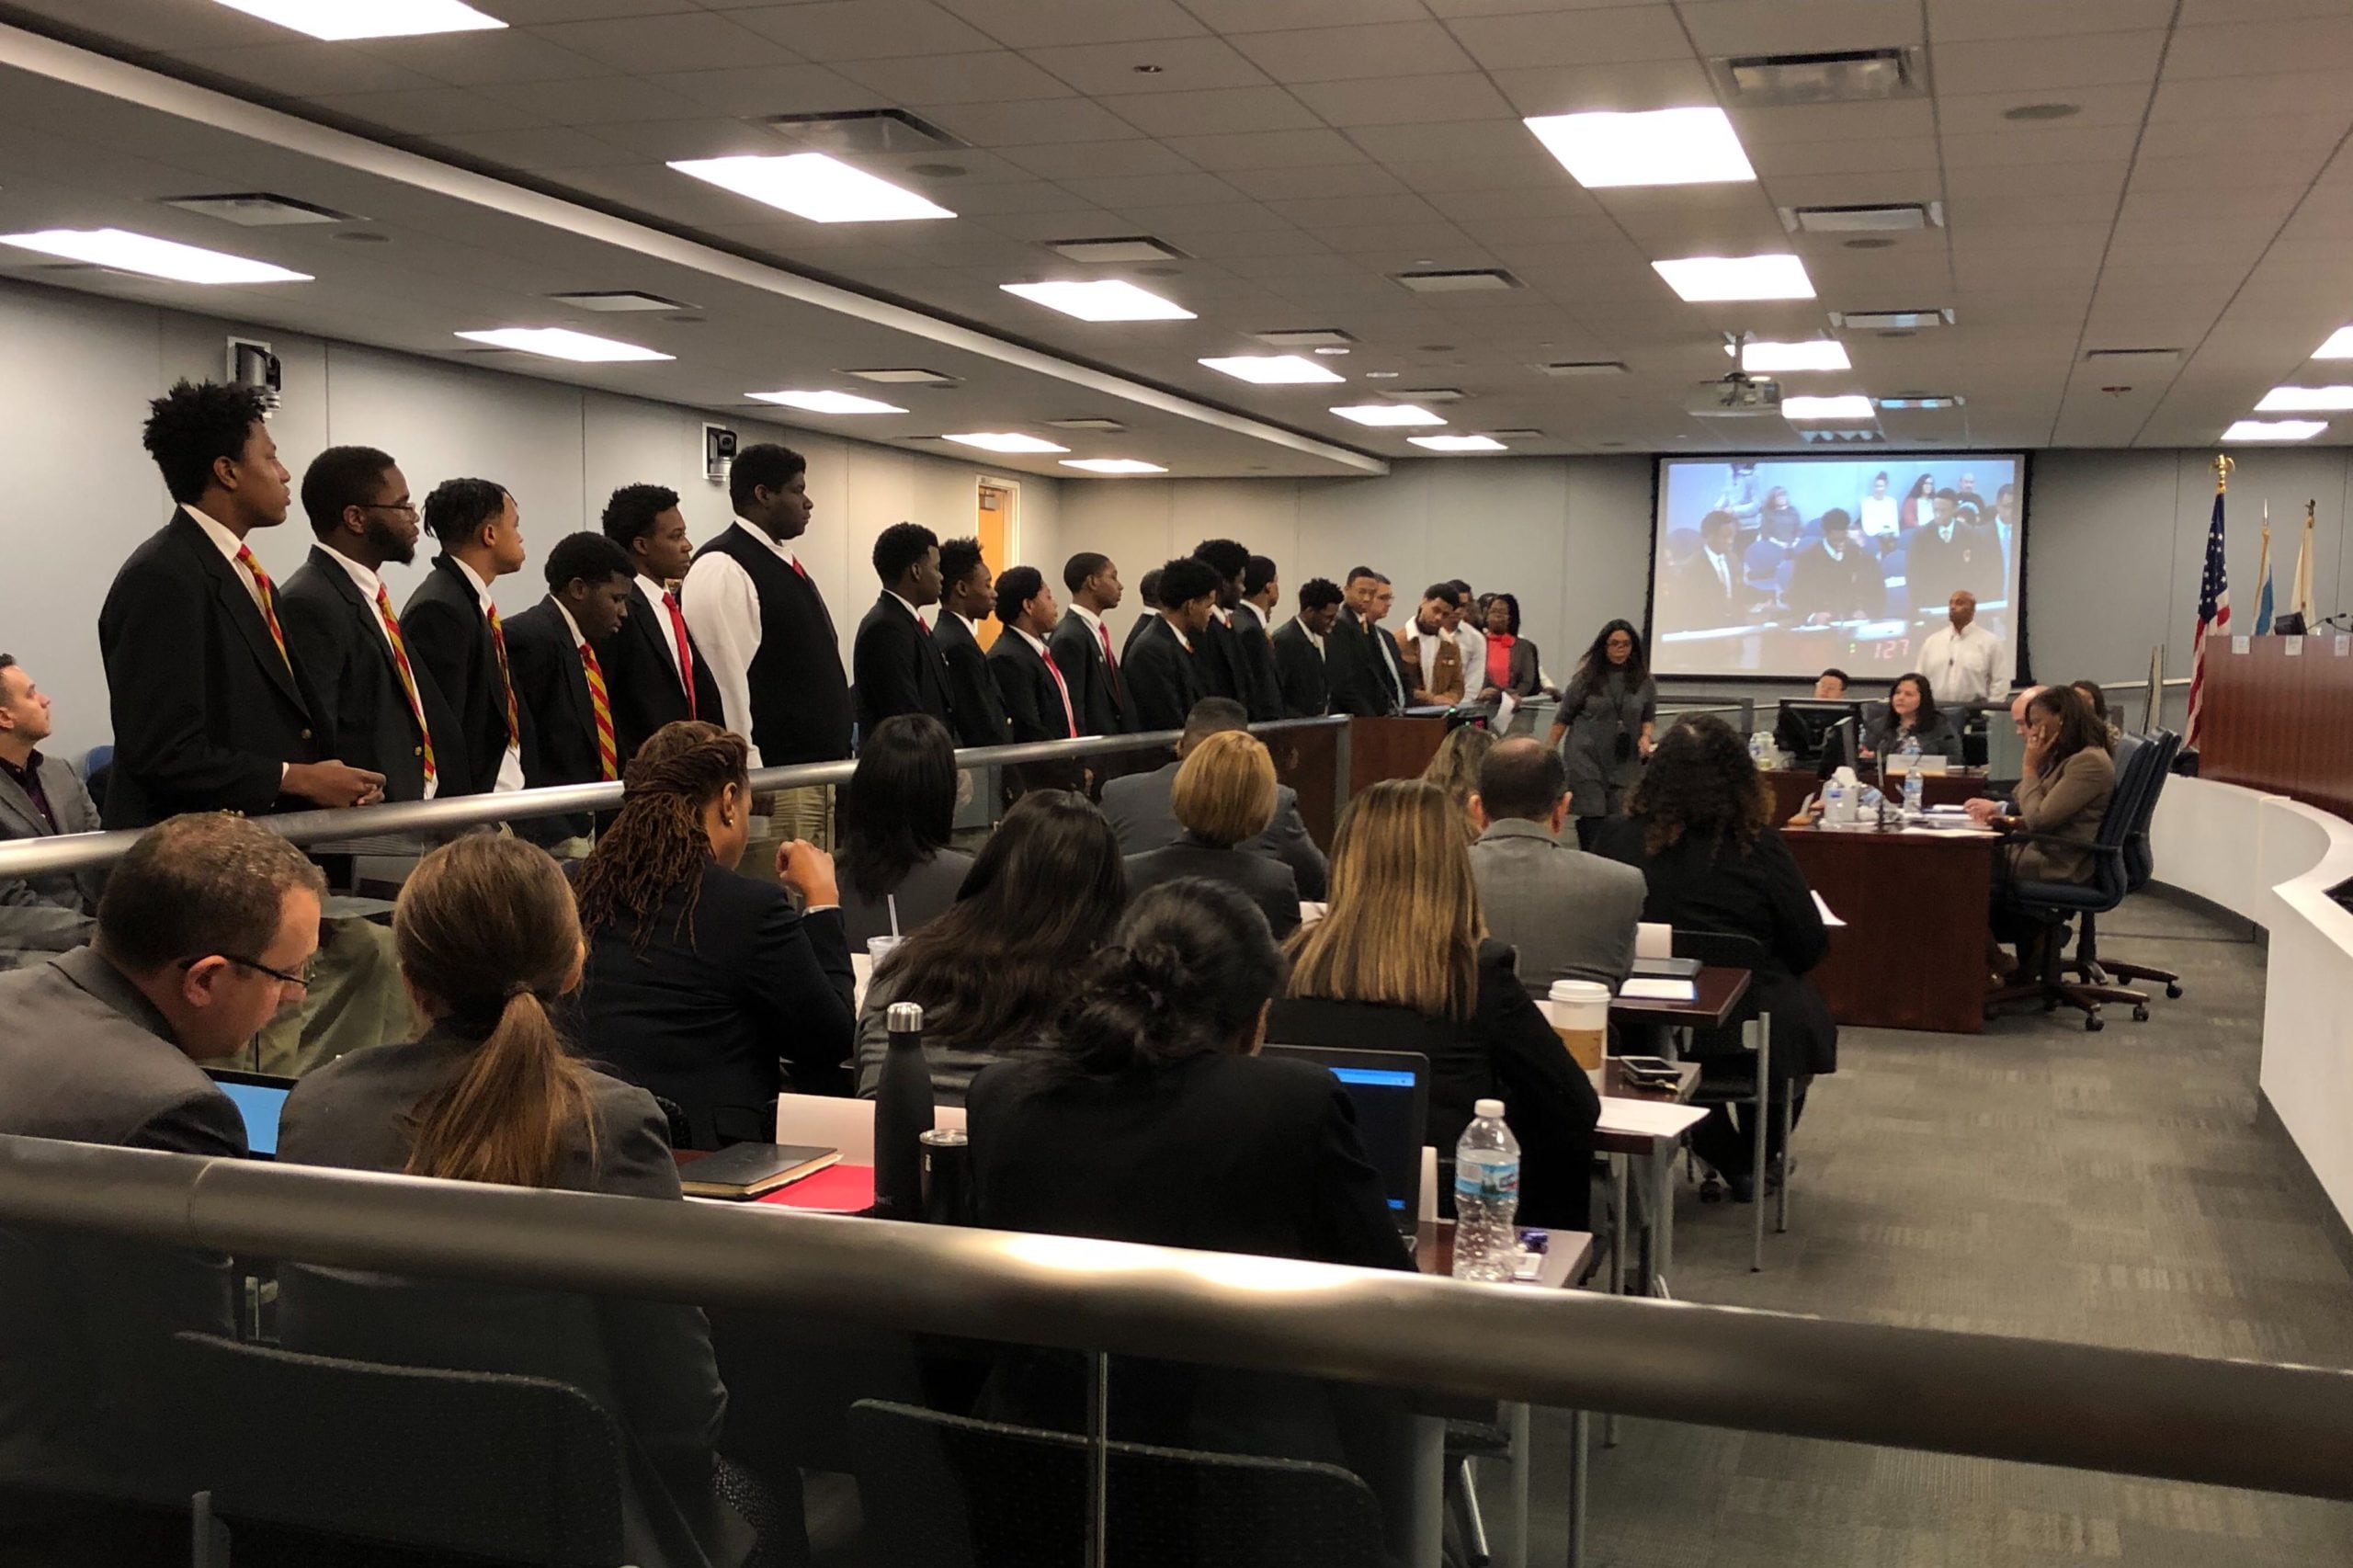 Urban Prep students attended the Chicago Board of Education meeting on Wednesday Jan. 22, 2020, to speak in support of their school.